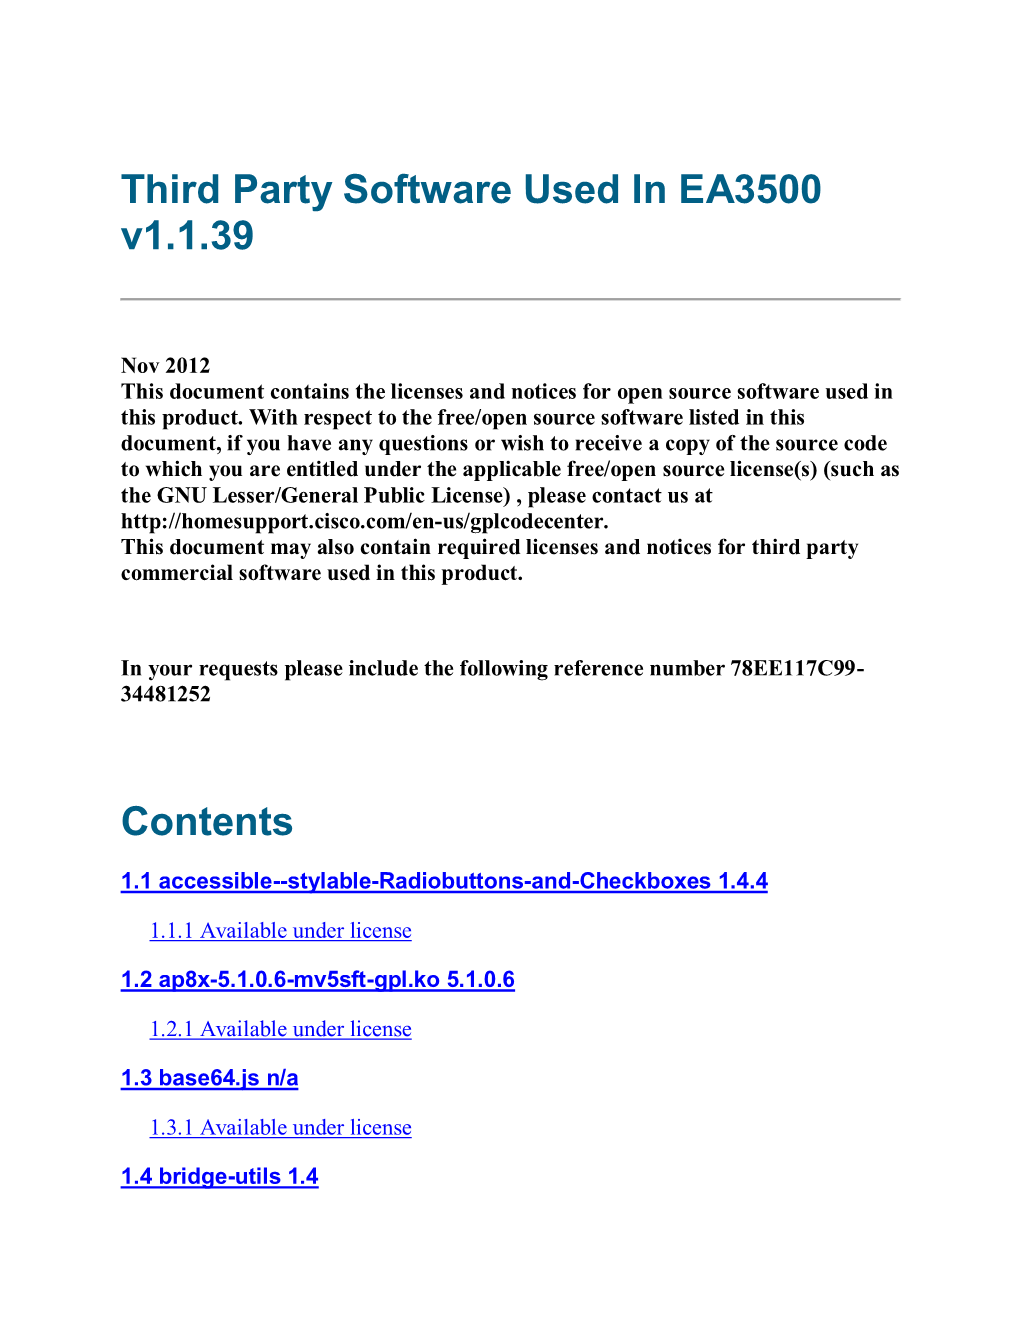 Third Party Software Used in EA3500 V1.1.39